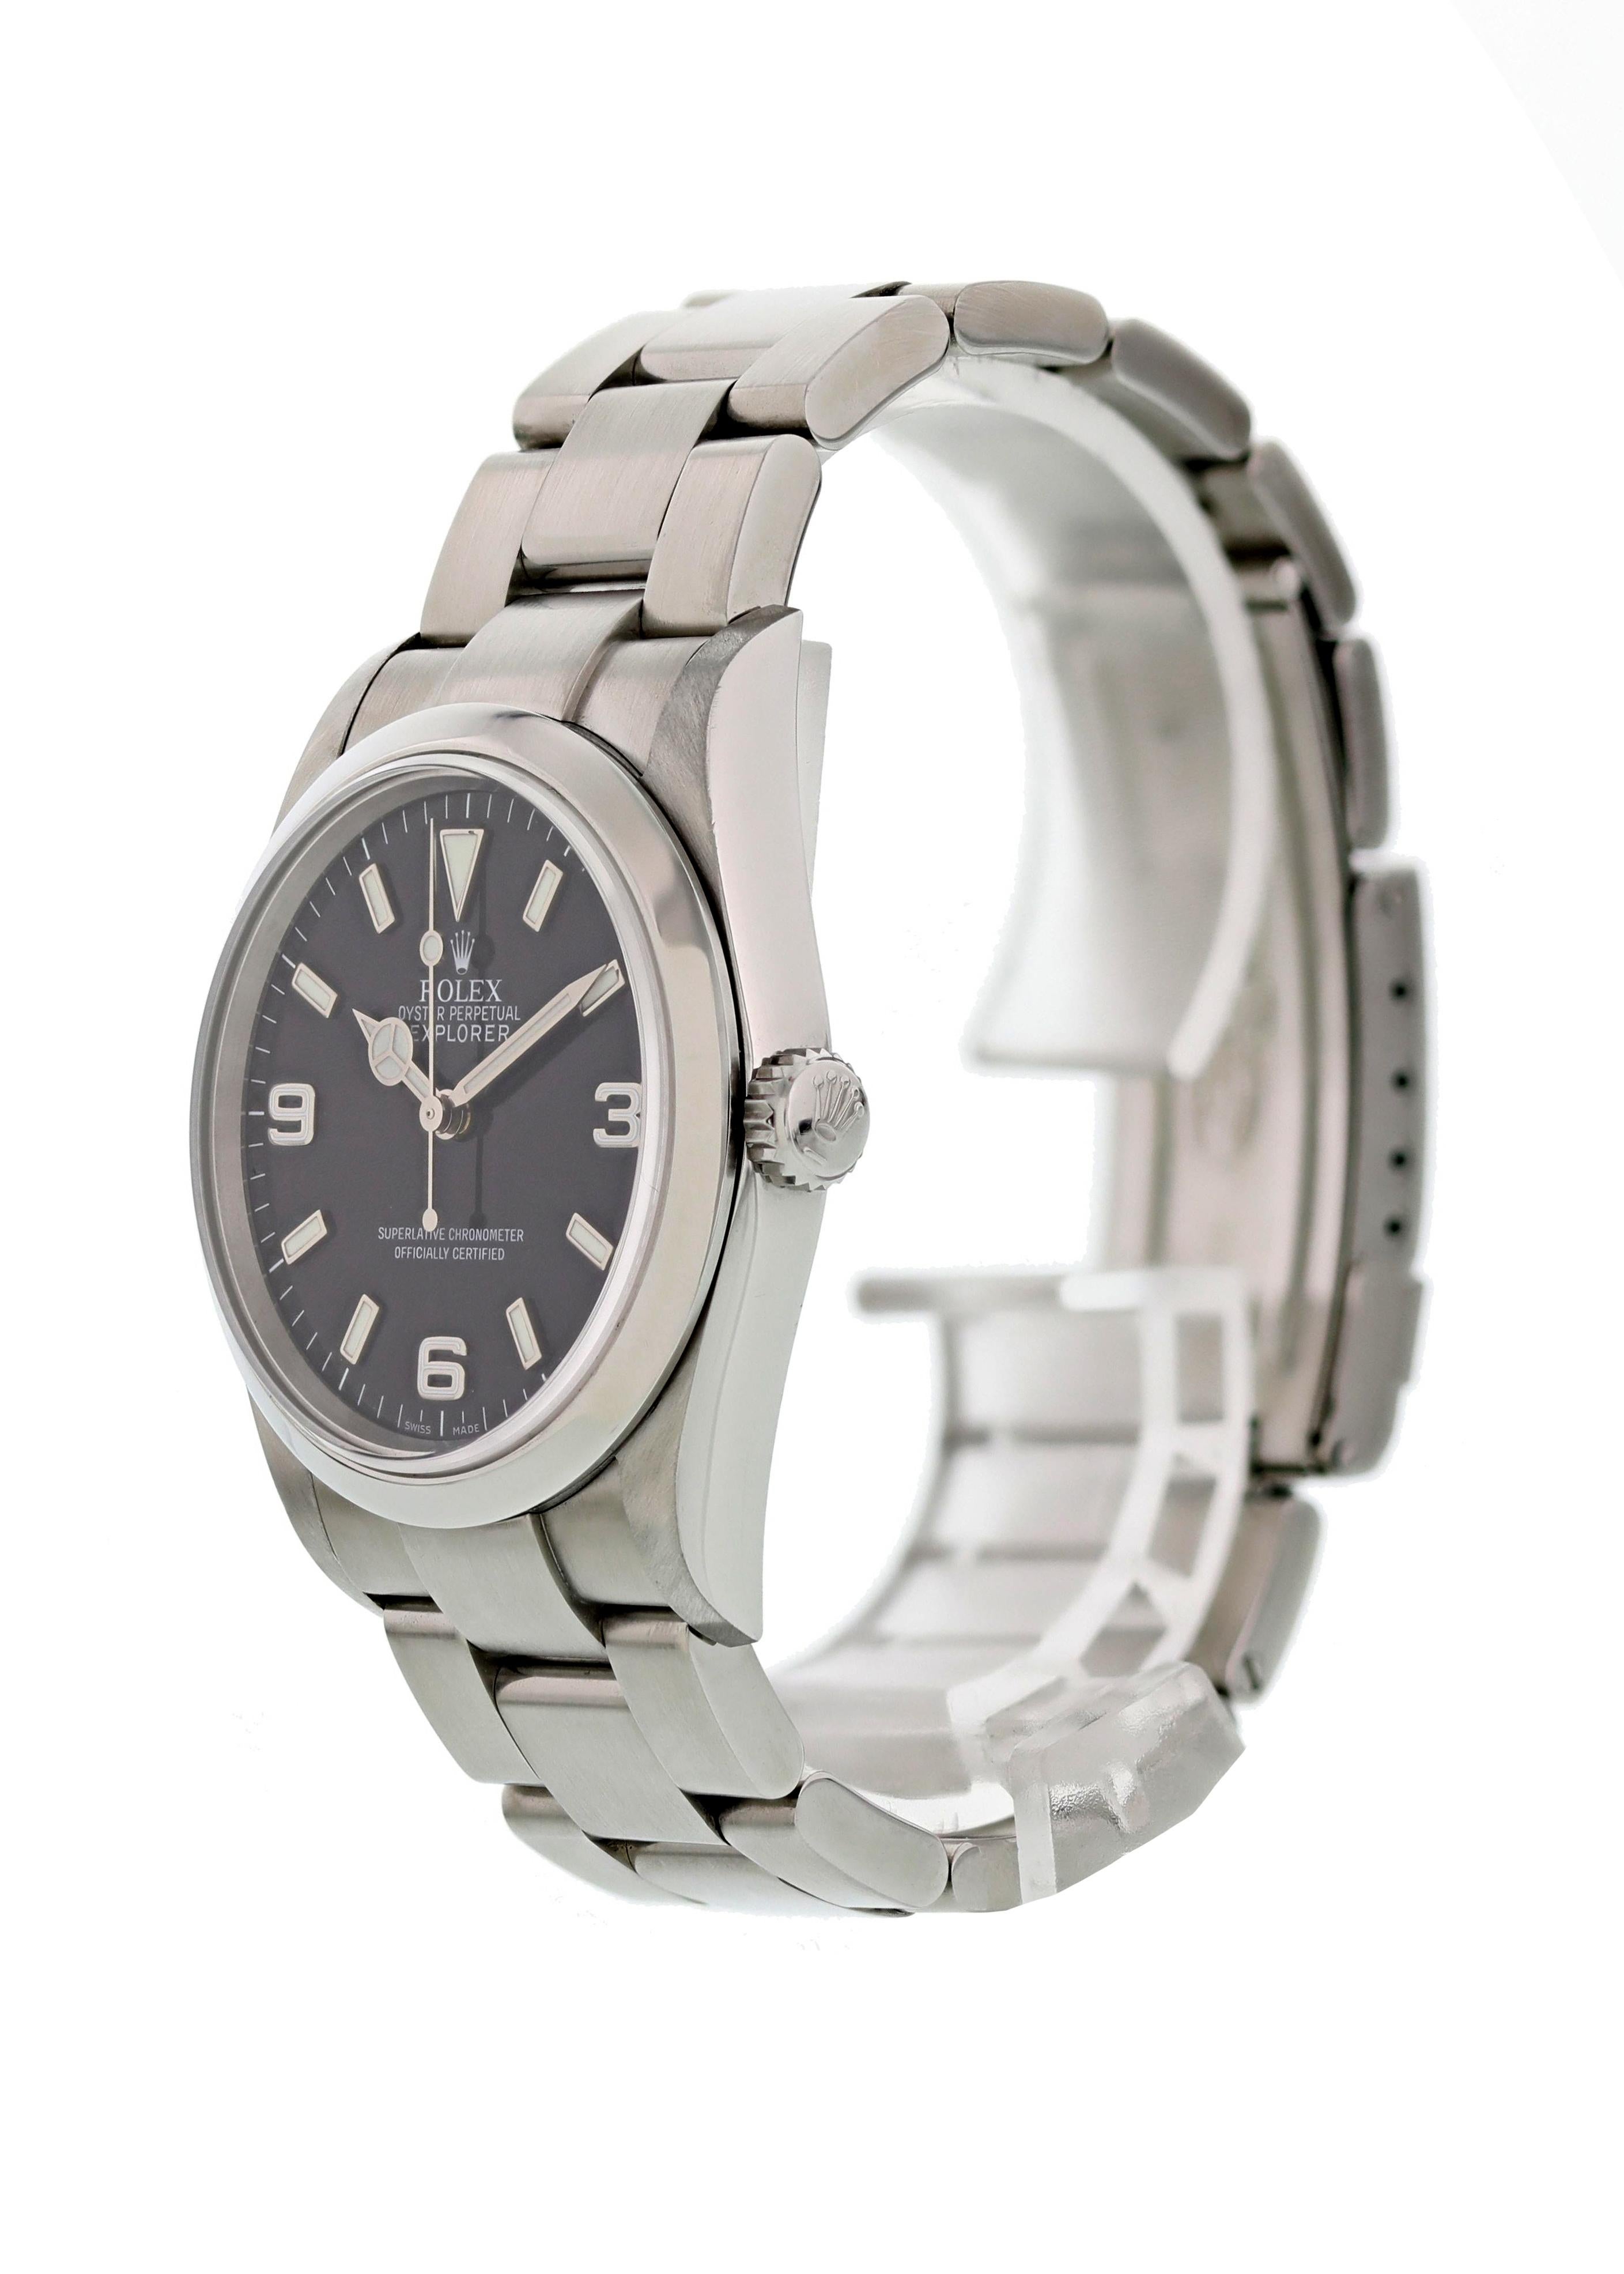 Rolex Oyster Perpetual Explorer 114270 Mens Watch. 36mm stainless steel case with smooth bezel. Black dial with index hour markers andArabic numeral hour markers at the 3, 6, and 9 o'clock position. Minute markers around the outer rim with luminous